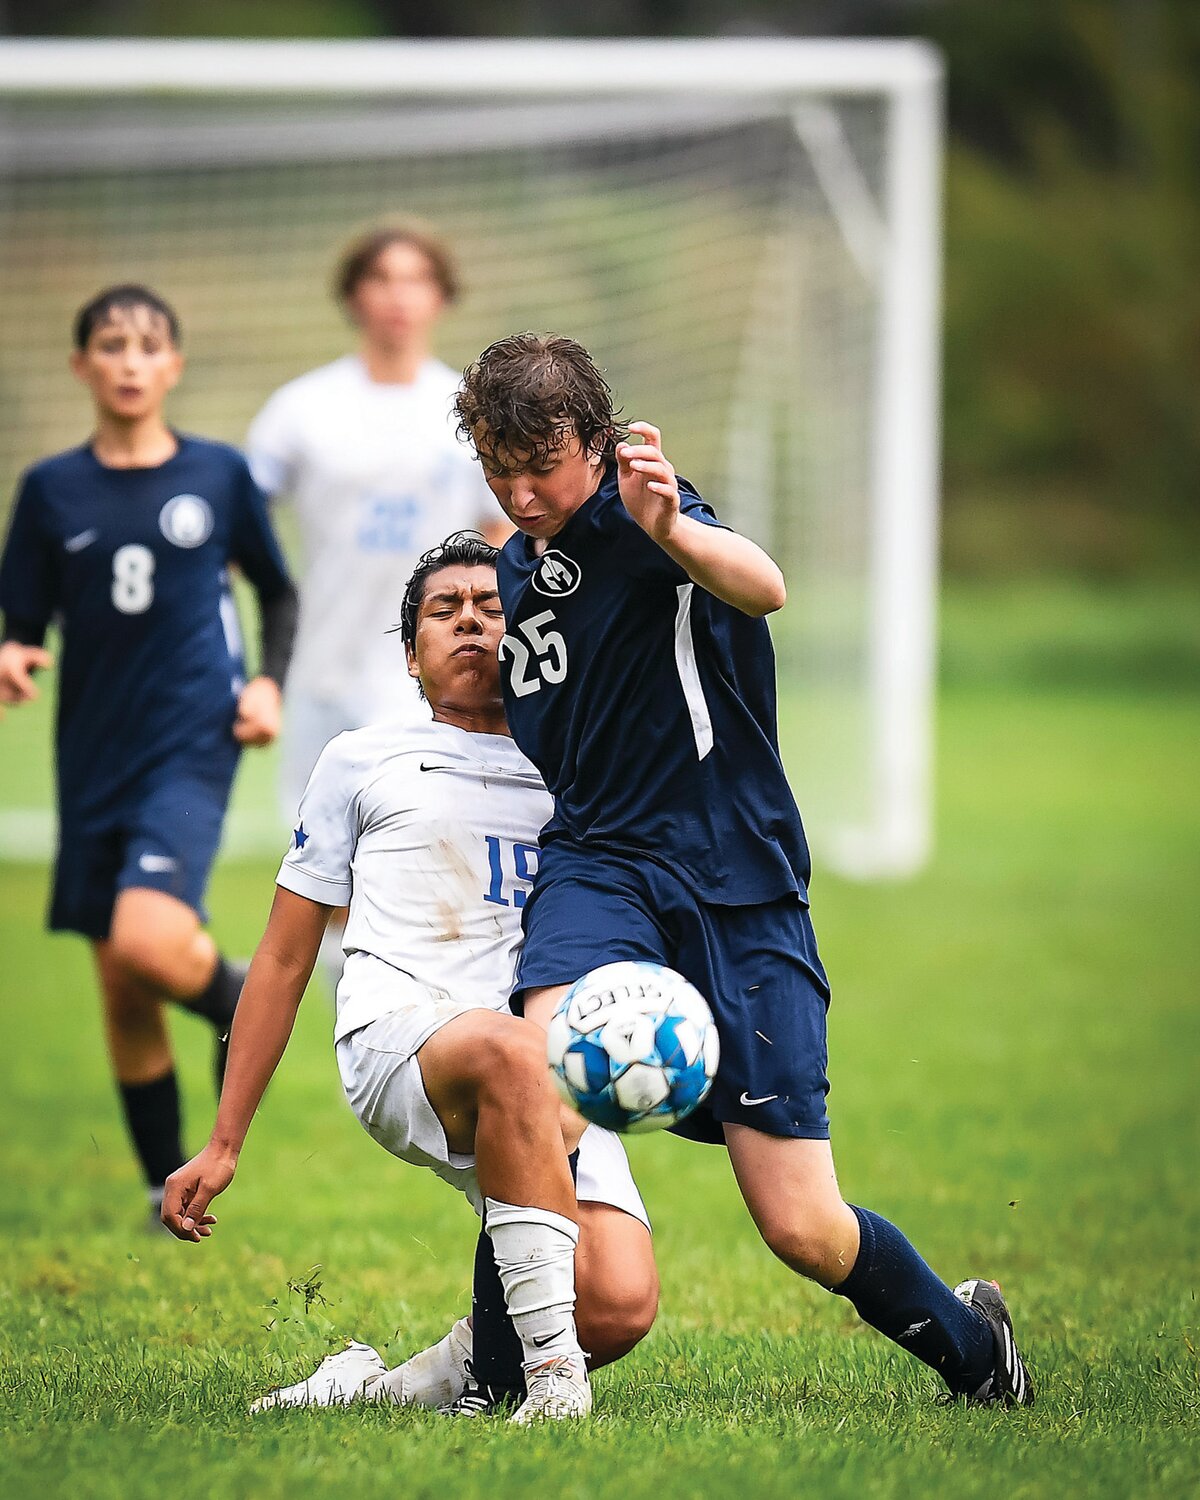 Solebury School’s Wentworth Smith beats South Hunterdon’s Kevin Lucas to the ball during the second half action.